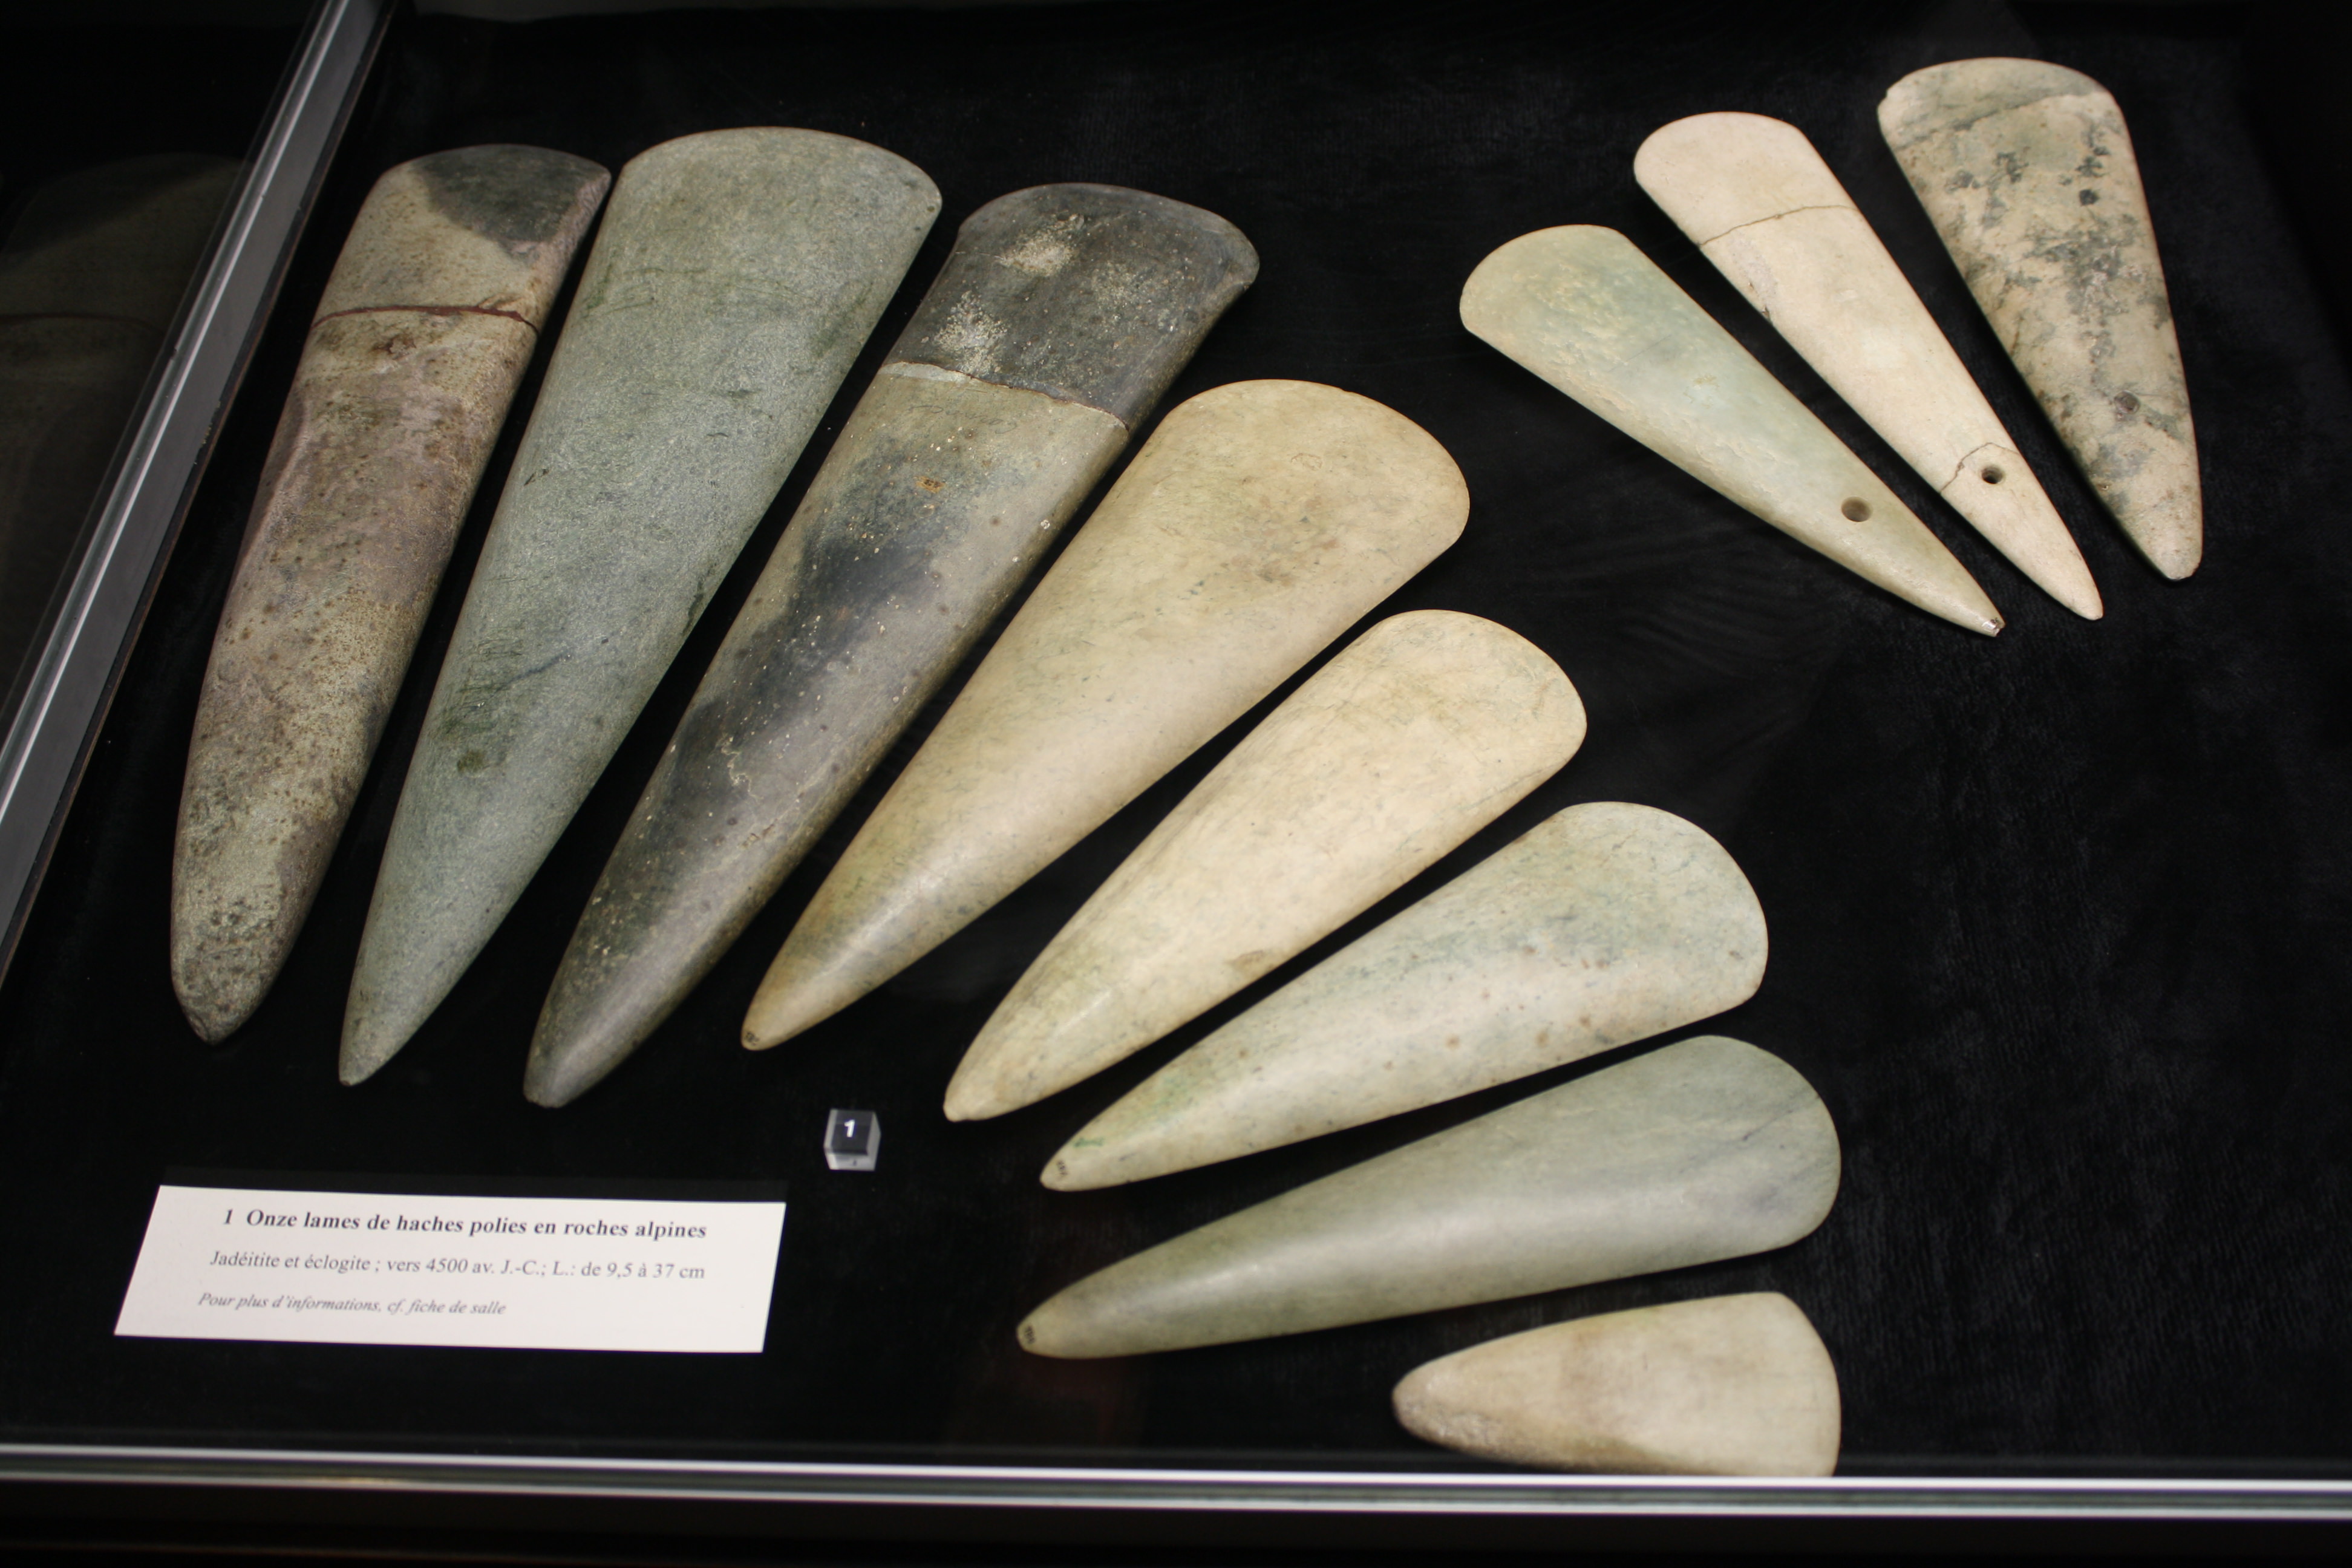 neolithic age tools